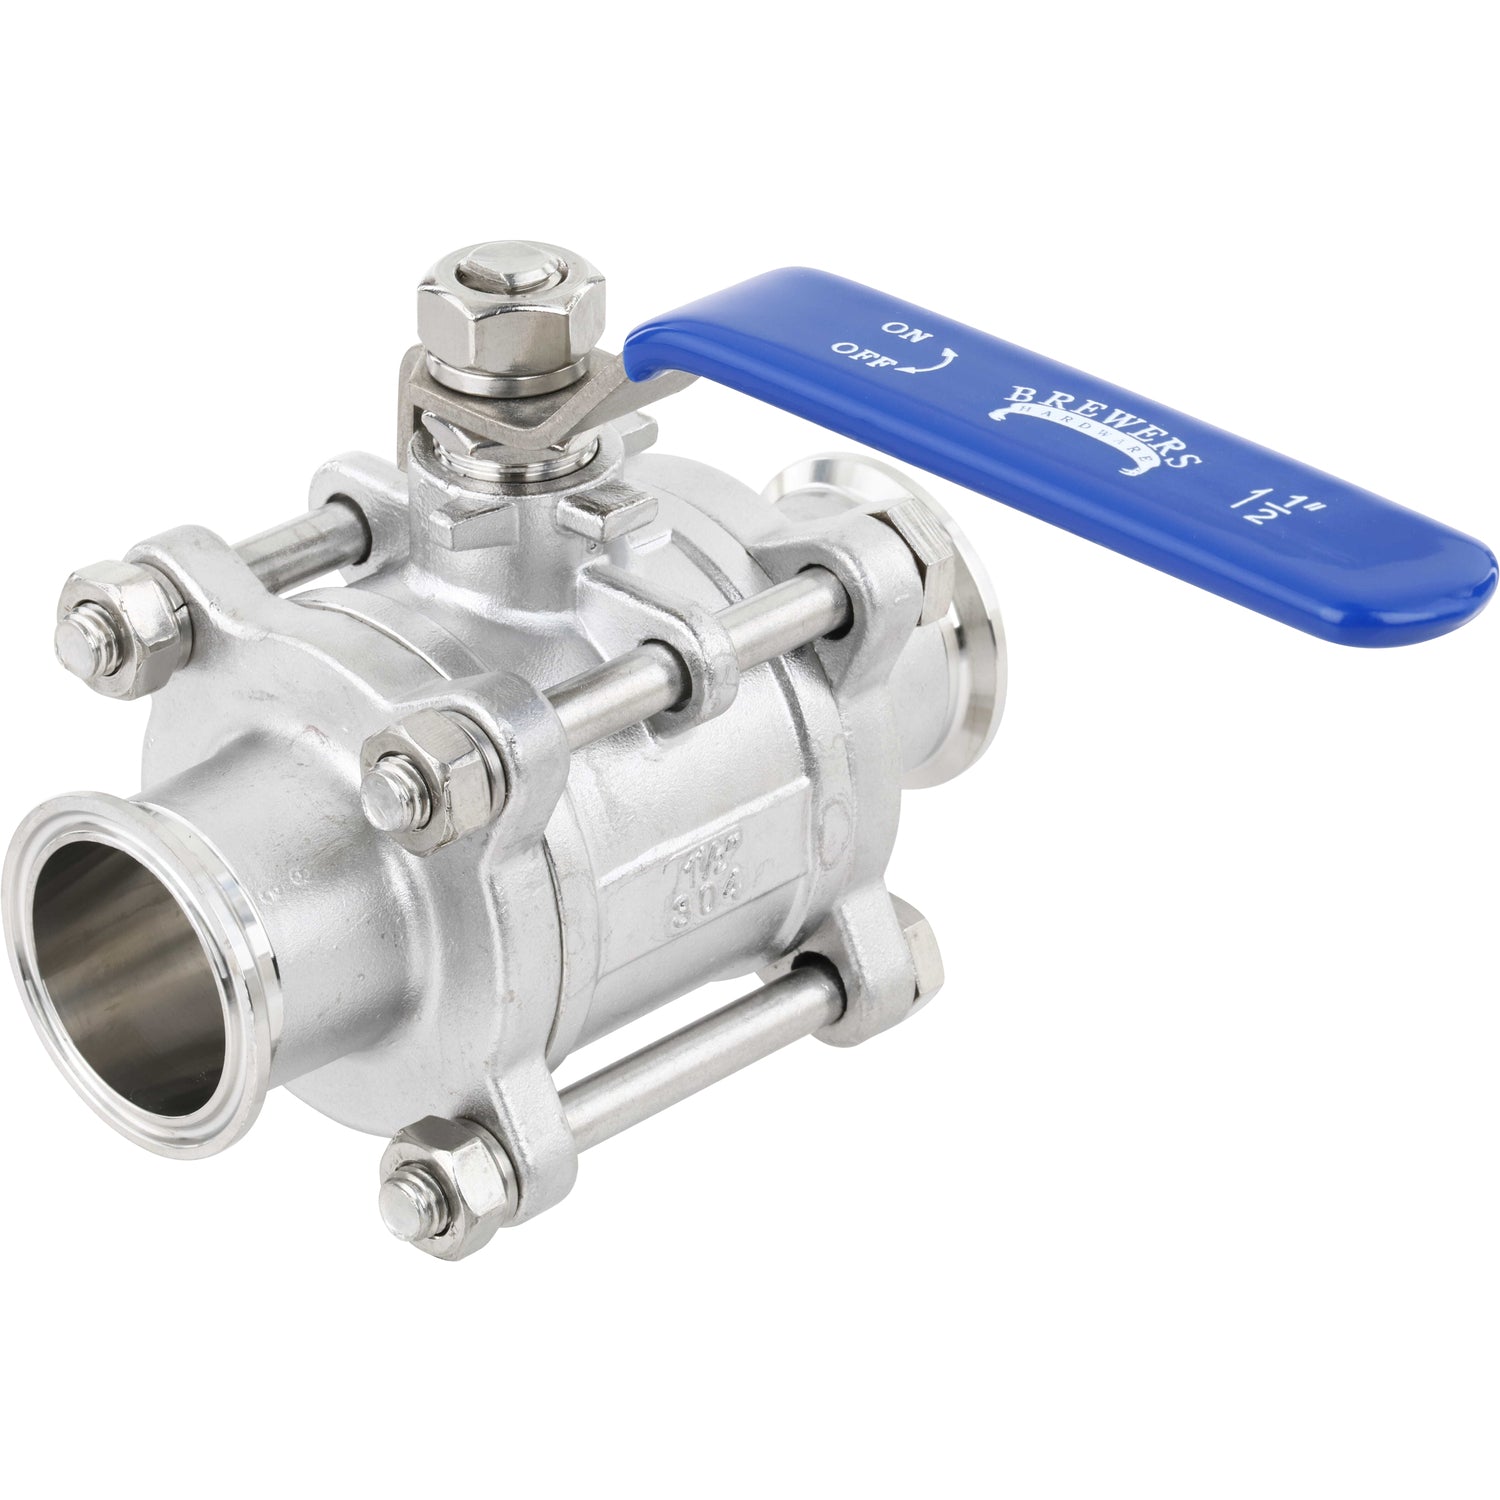 Stainless steel, three piece ball valve with blue handle in the closed position. Part shown on white background.